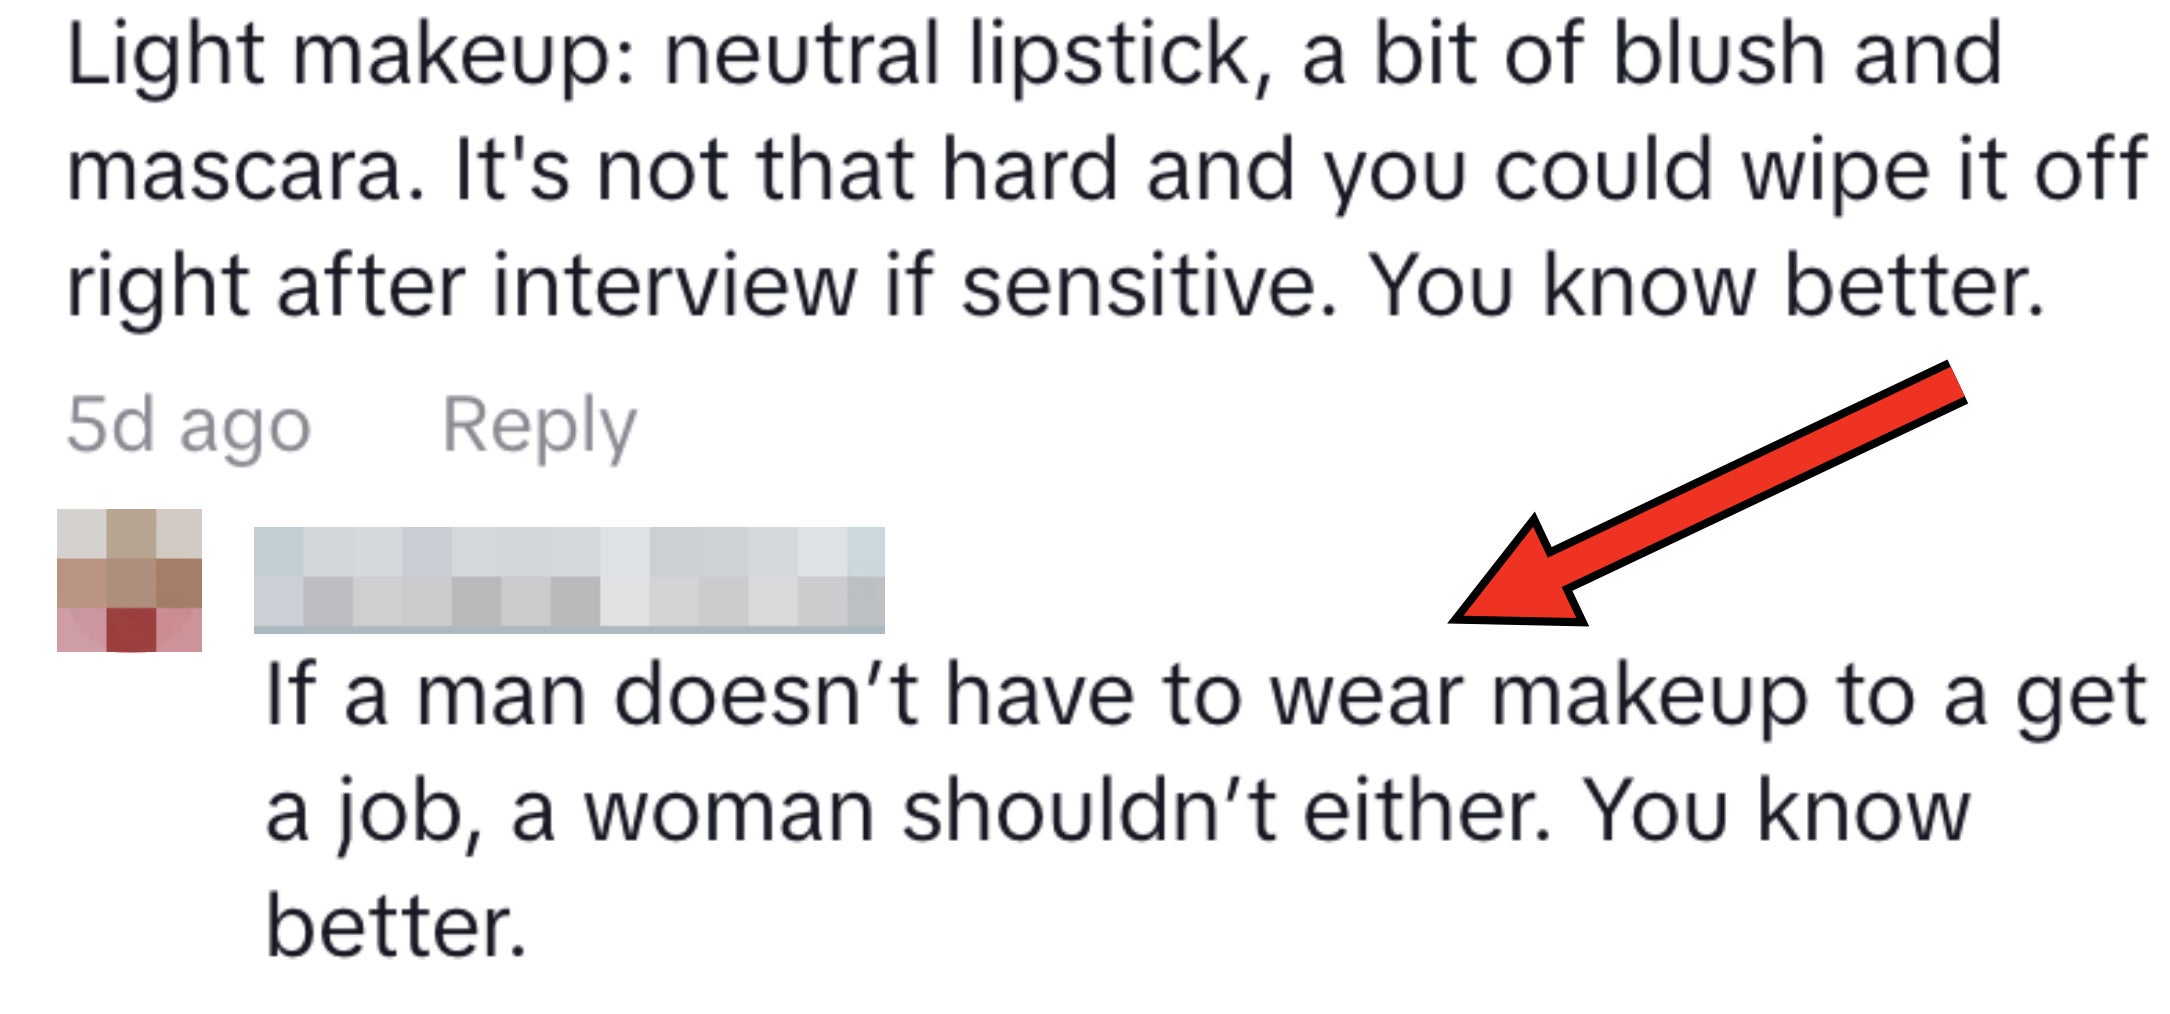 Three social media comments discussing opinions on wearing makeup for interviews and jobs